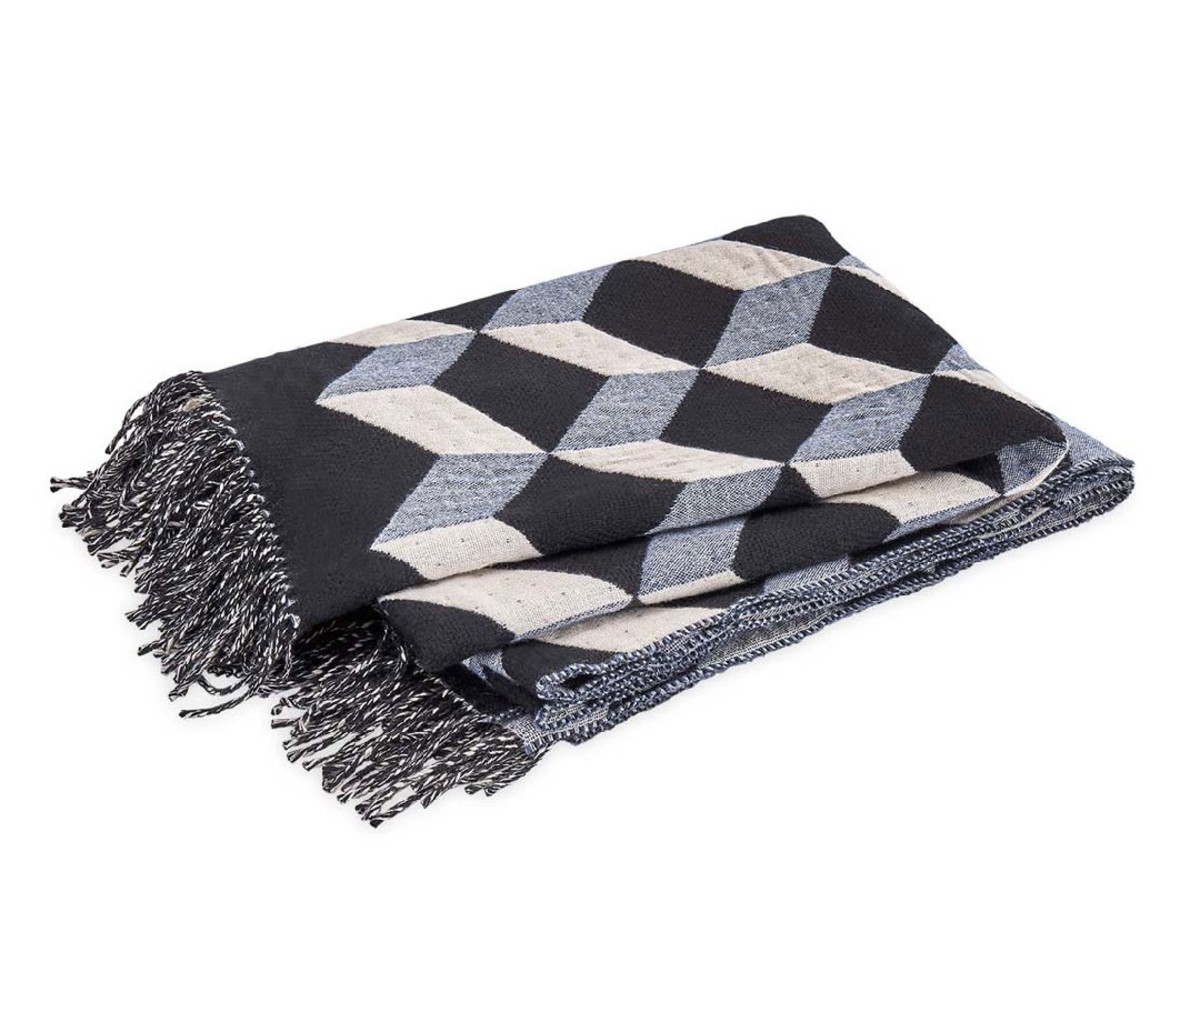 The Leo Throw by Matouk, black, white and grey wool-cashmere throw